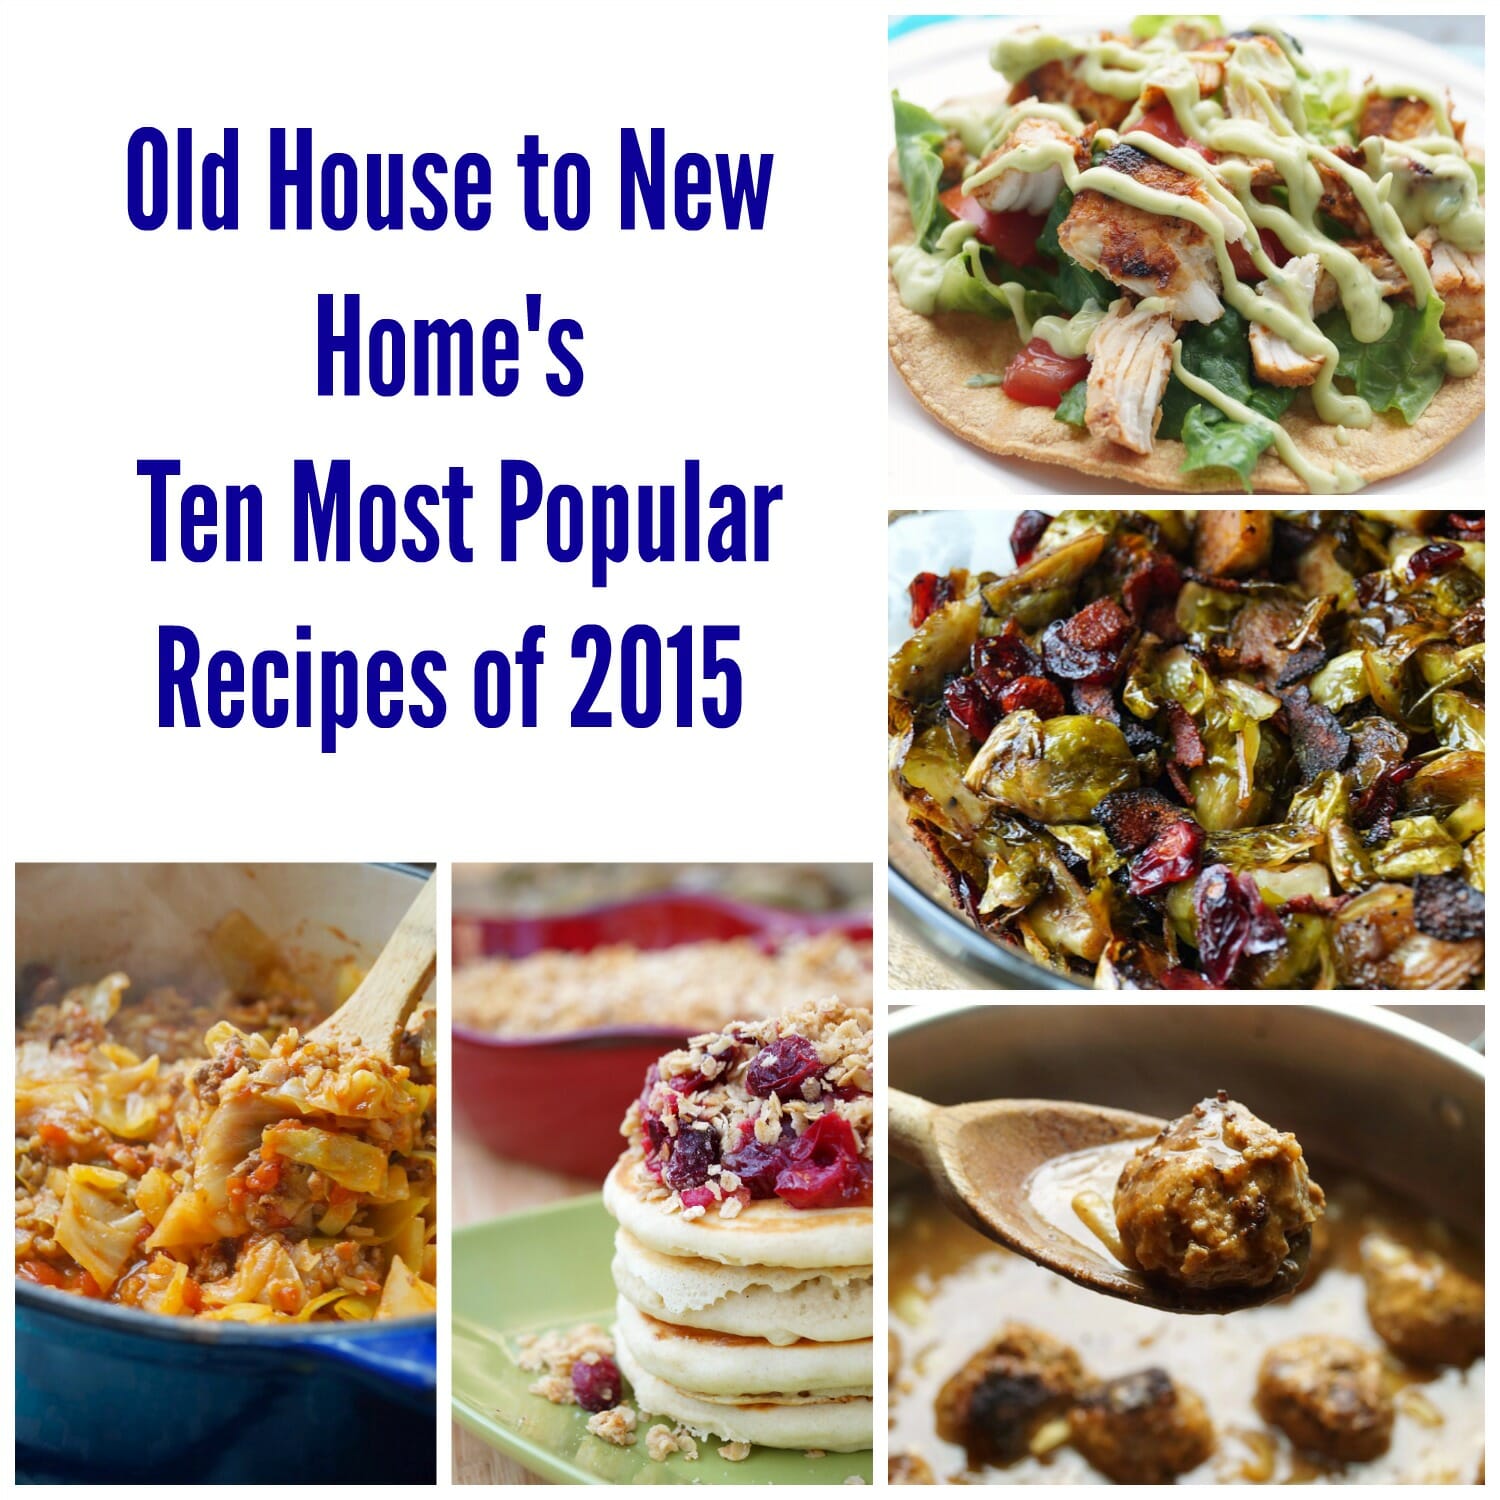 Old House to New Home's Top Recipes of 2015!